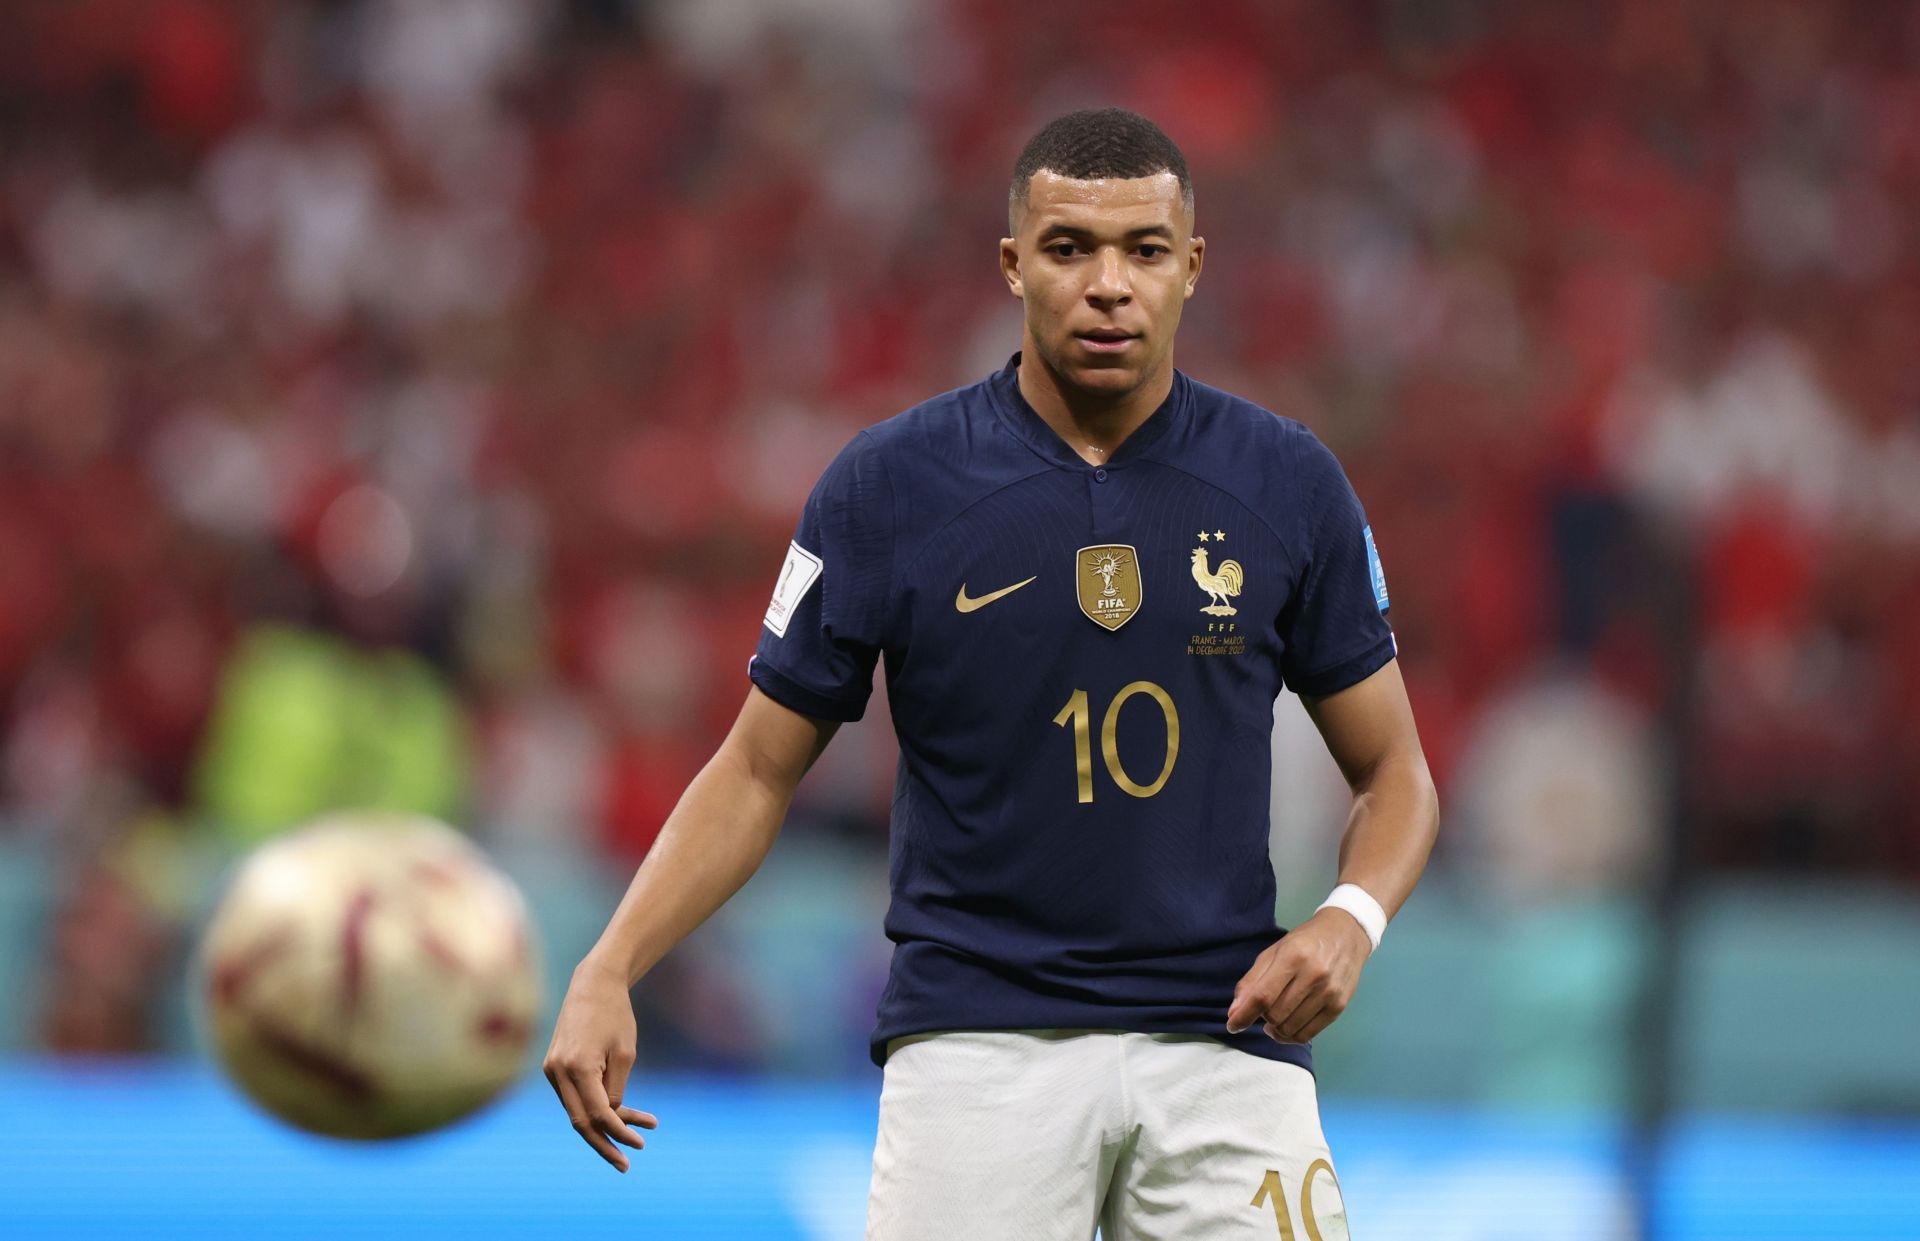 Kylian Mbappe is preparing for 2022 FIFA World Cup final.